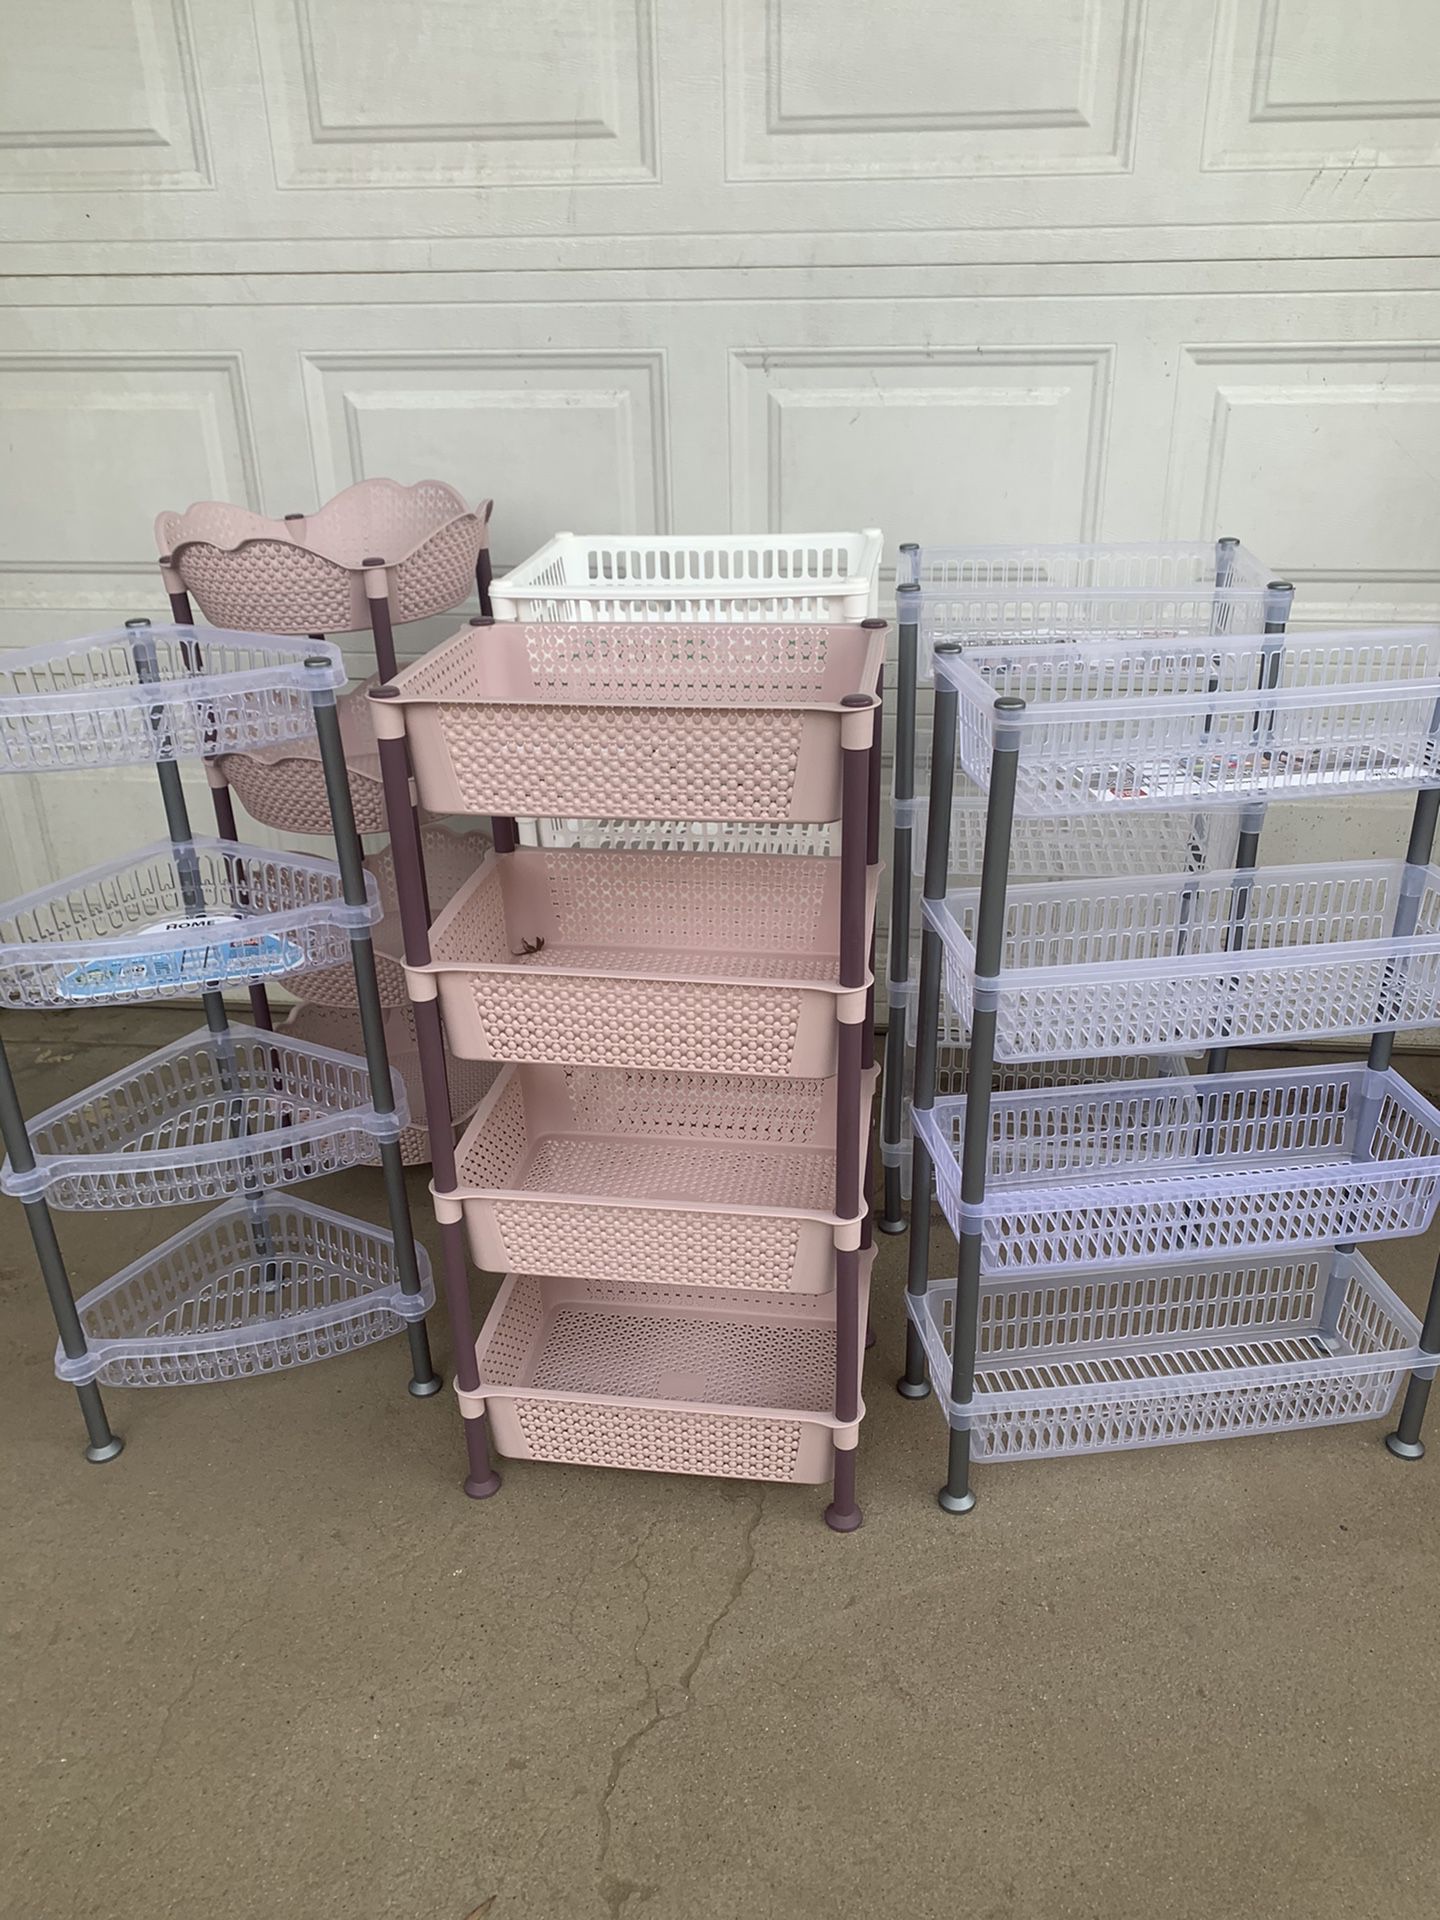 4 tier shelves used in narrow spaces suitable for home bathroom kitchen bedroom laundry dorm garage office